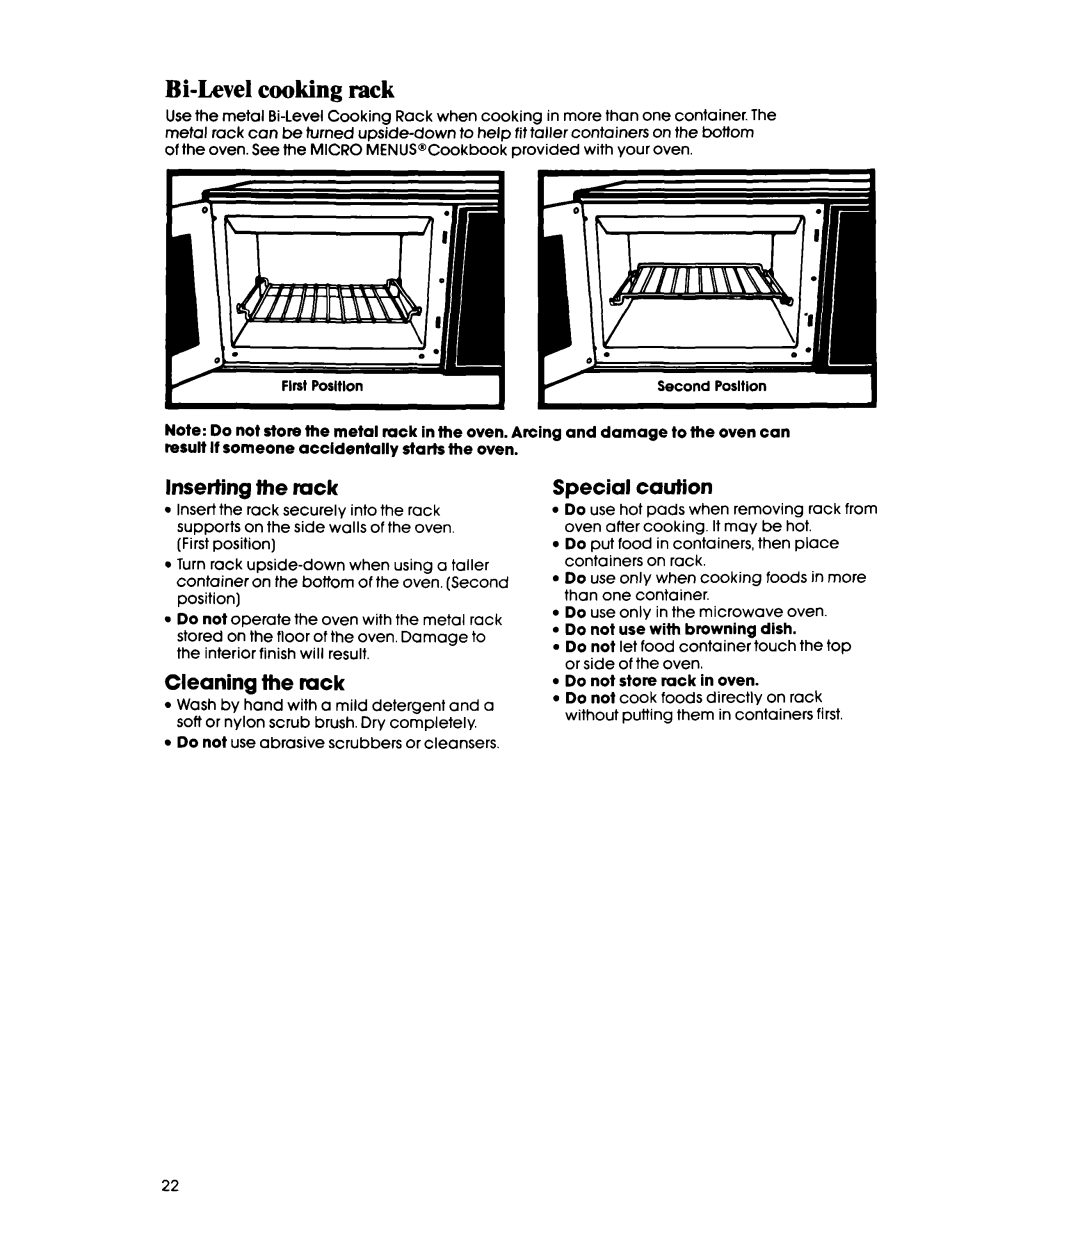 Whirlpool MW8570XR manual Bi-Levelcooking rack, inserting the ruck, Cleaning the rack, Special caution 